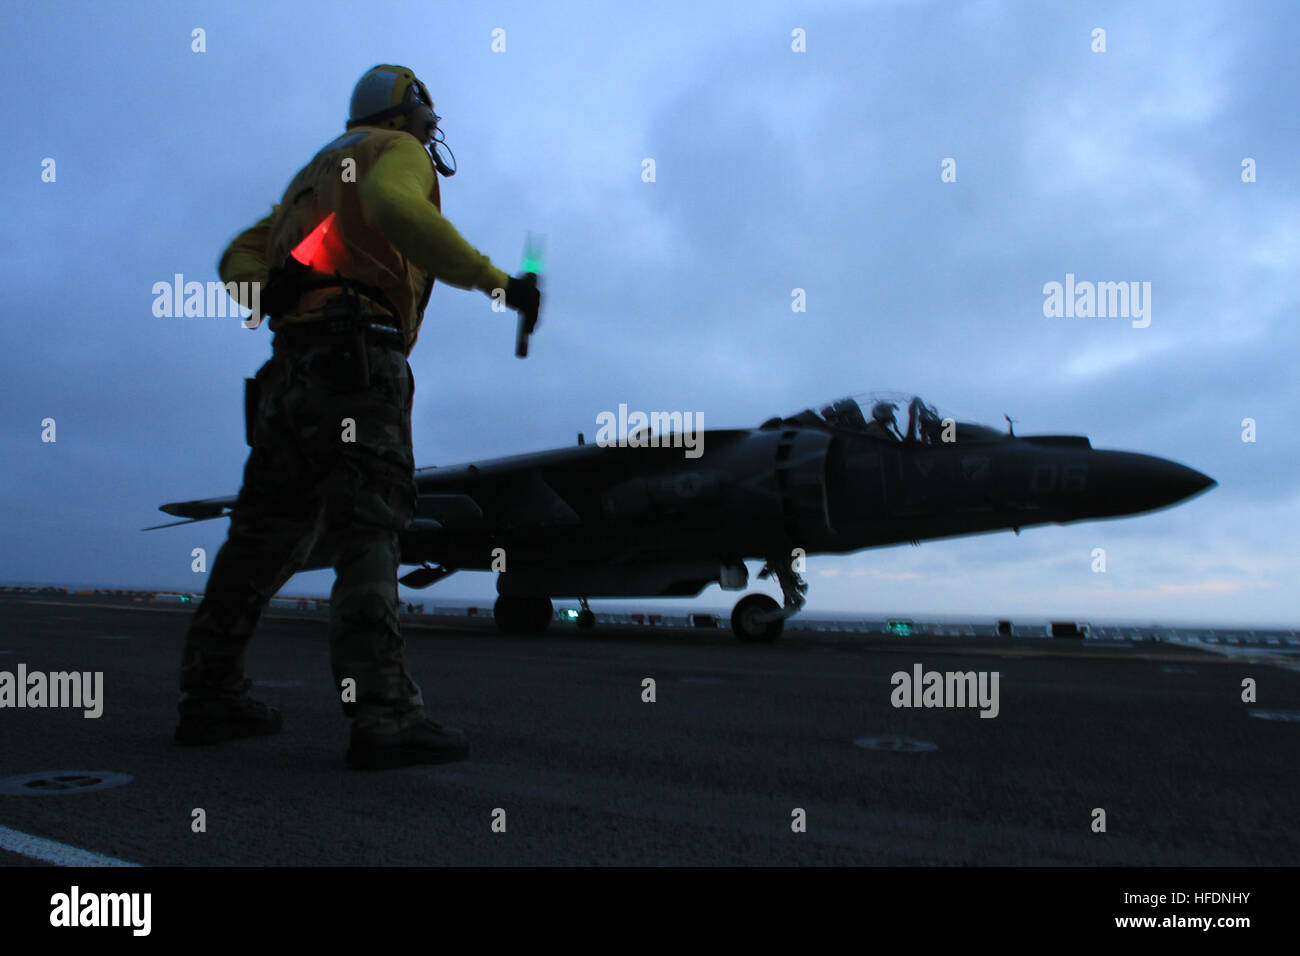 PACIFIC OCEAN (March 25, 2013)  A landing signal enlisted guides an AV-8B Harrier assigned to Marine Attack Squadron (VMA) 214 during flight operations aboard the amphibious assault ship USS Boxer (LHD 4).  Boxer is underway conducting training off the coast of Southern California. (U.S. Navy photo by Mass Communication Specialist 2nd Class Oscar Espinoza/Released) 130325-N-CD336-215 Join the conversation http://www.facebook.com/USNavy http://www.twitter.com/USNavy http://navylive.dodlive.mil A Sailor directs an AV-8B aboard USS Boxer. (8597781318) Stock Photo